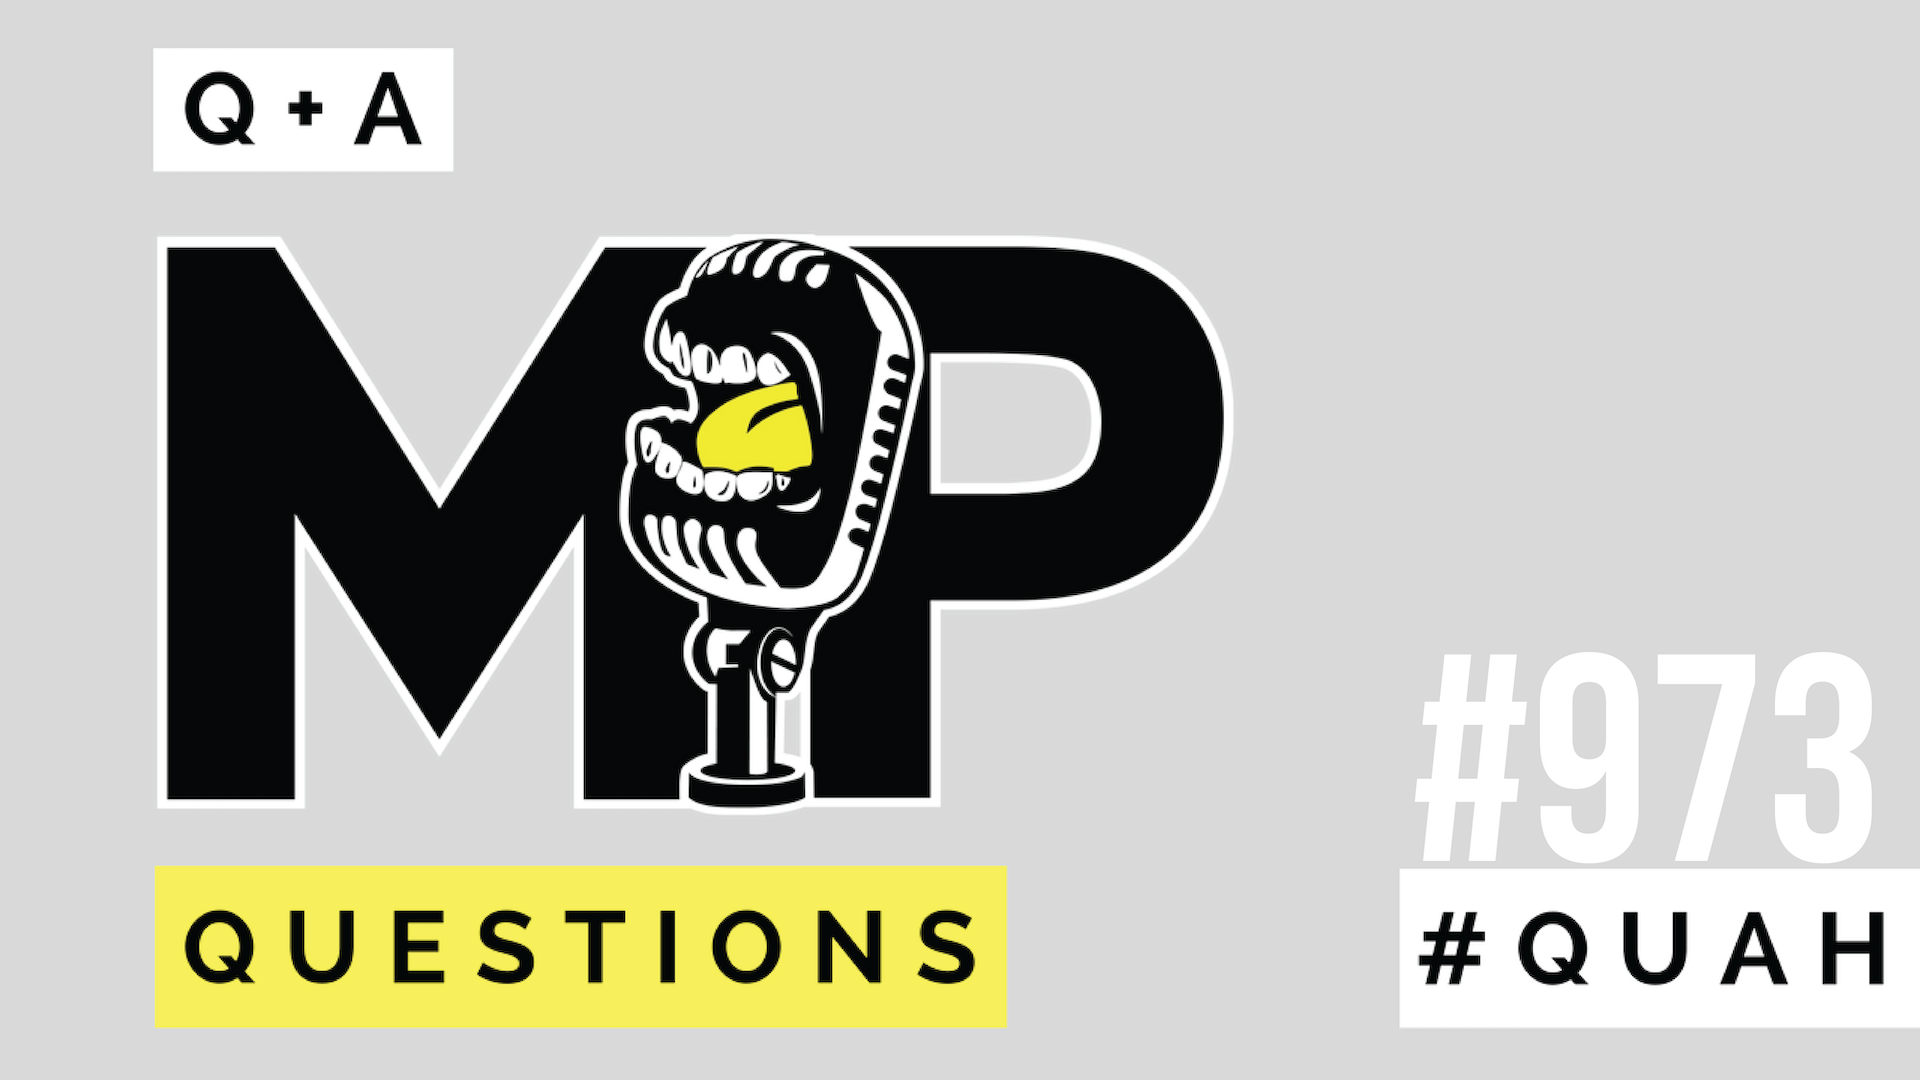 973: Why Mind Pump Doesn’t CrossFit Revisited, the Reason Powerlifters Carry More Body Fat, How to Negate the Negative Effects of Sitting & MORE